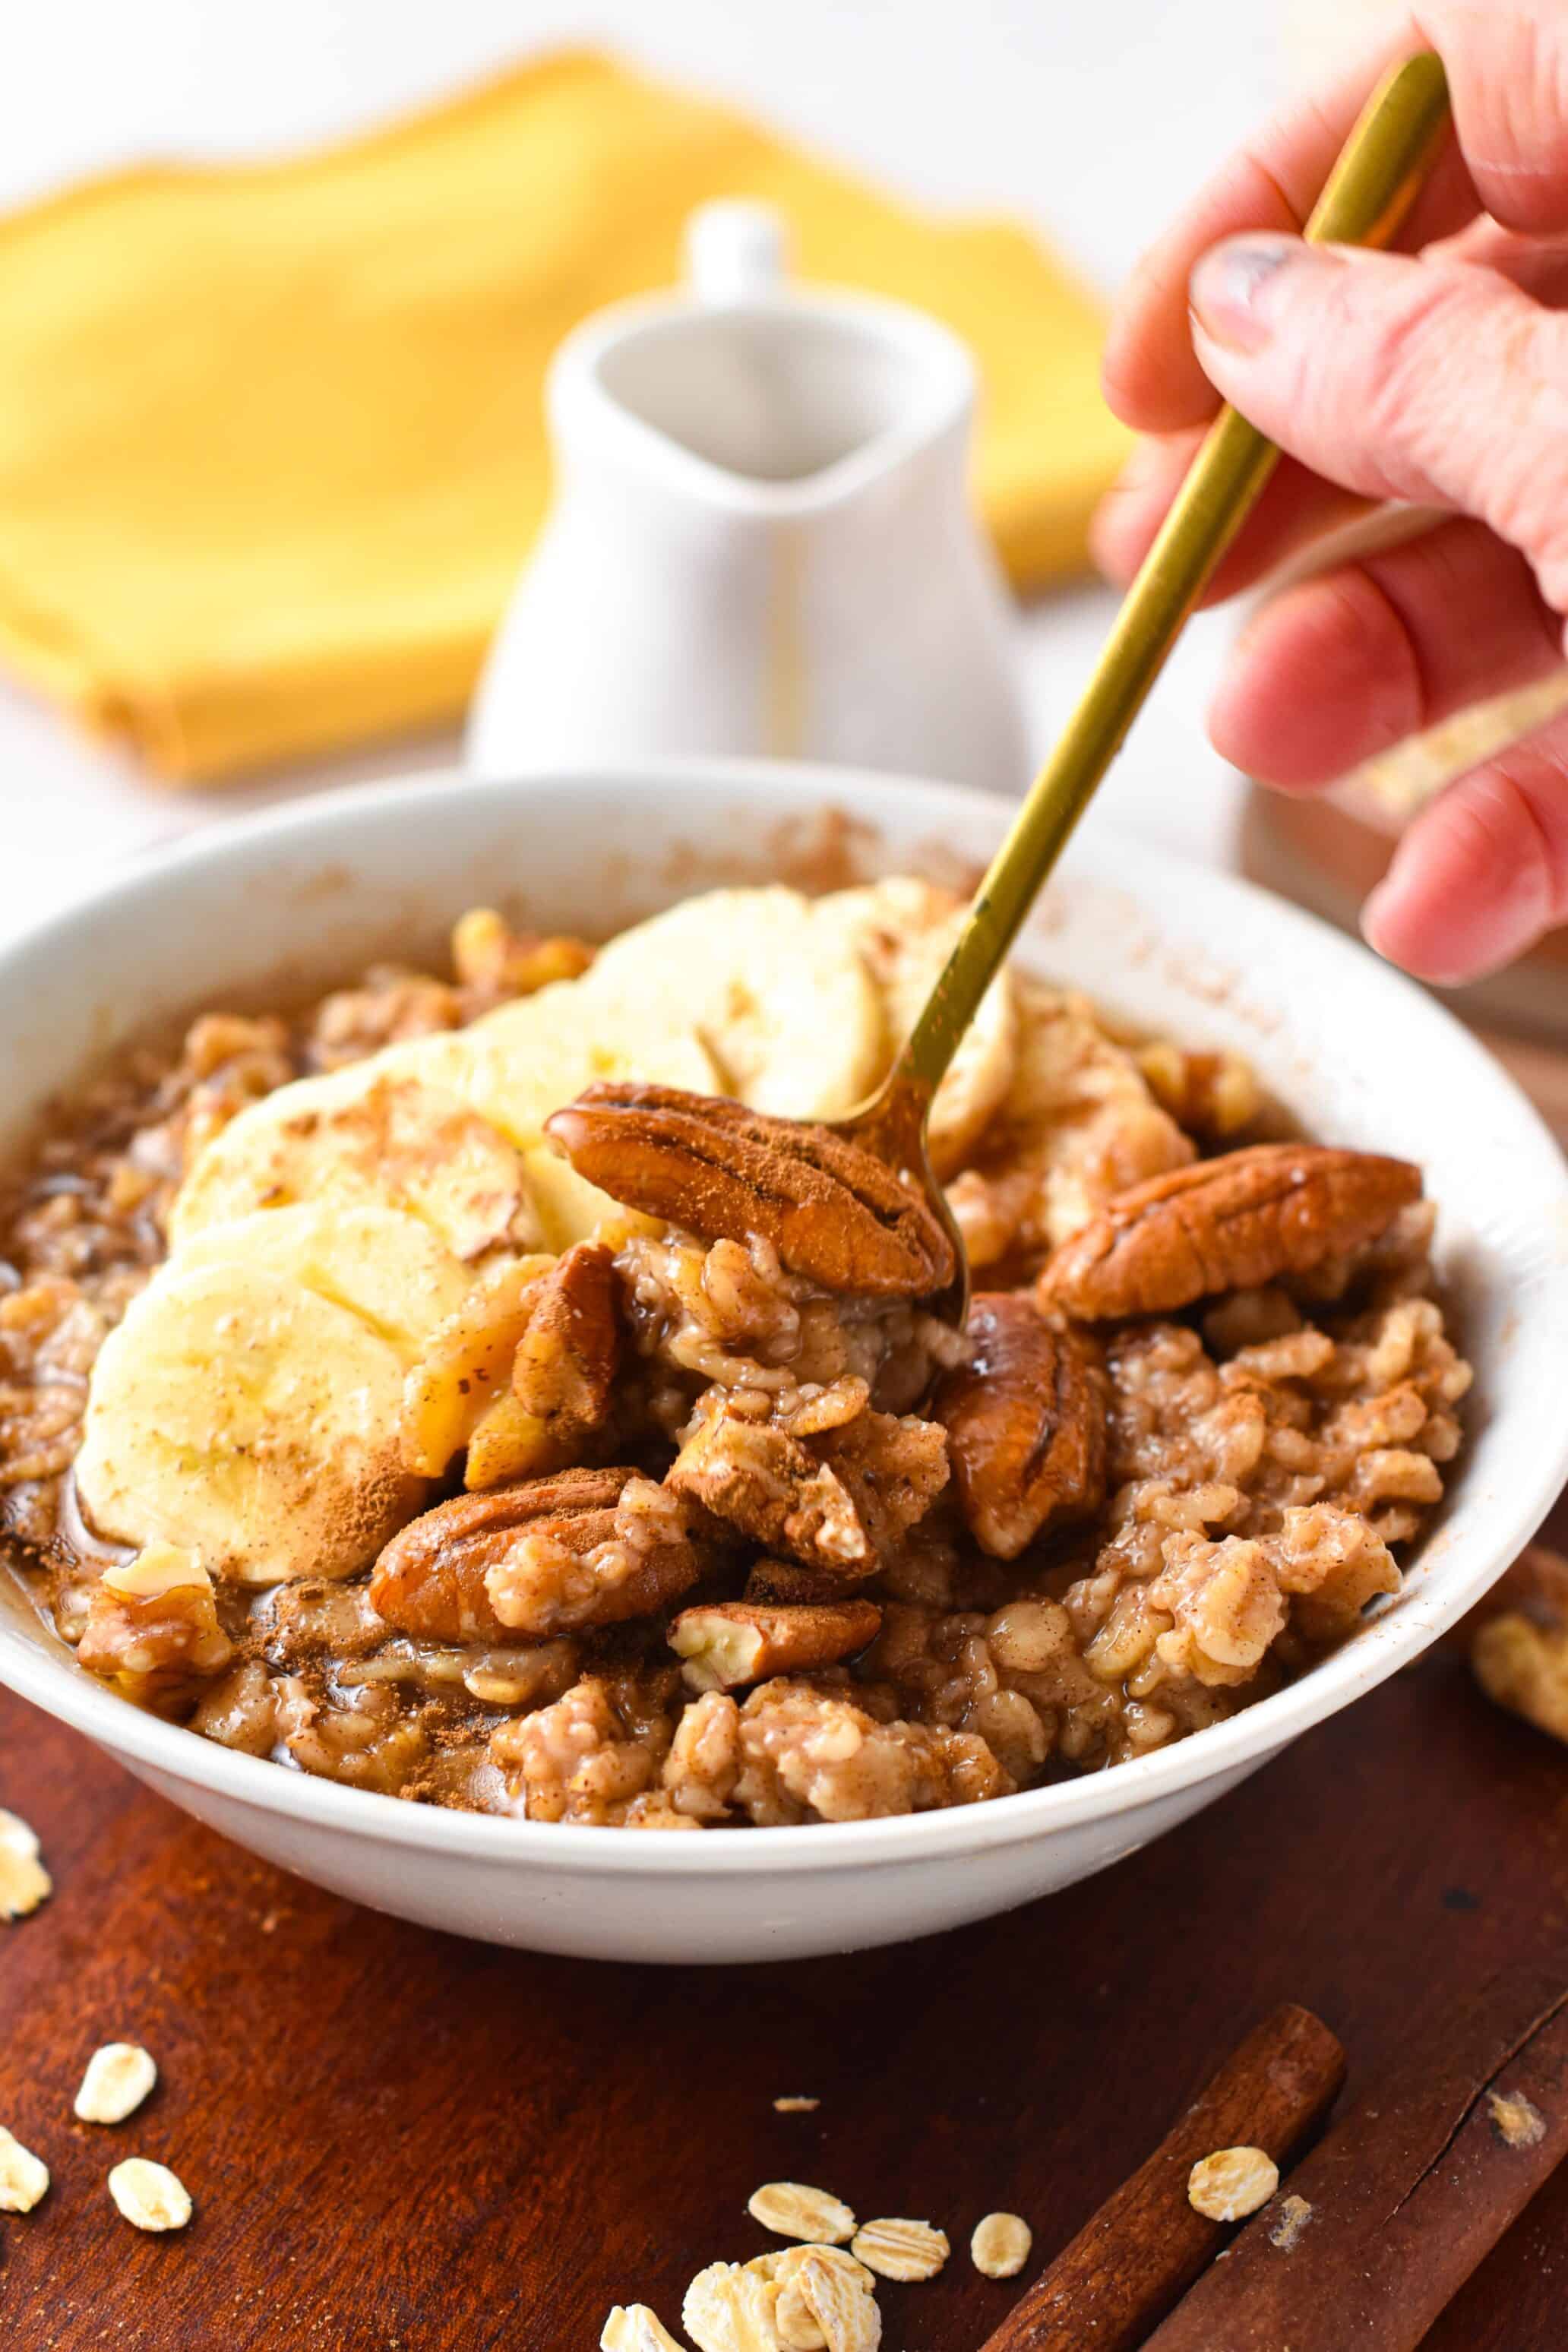 A bowl oaf cinnamon oatmeal with a golden spoon, served with banana slices, pecans and walnuts.